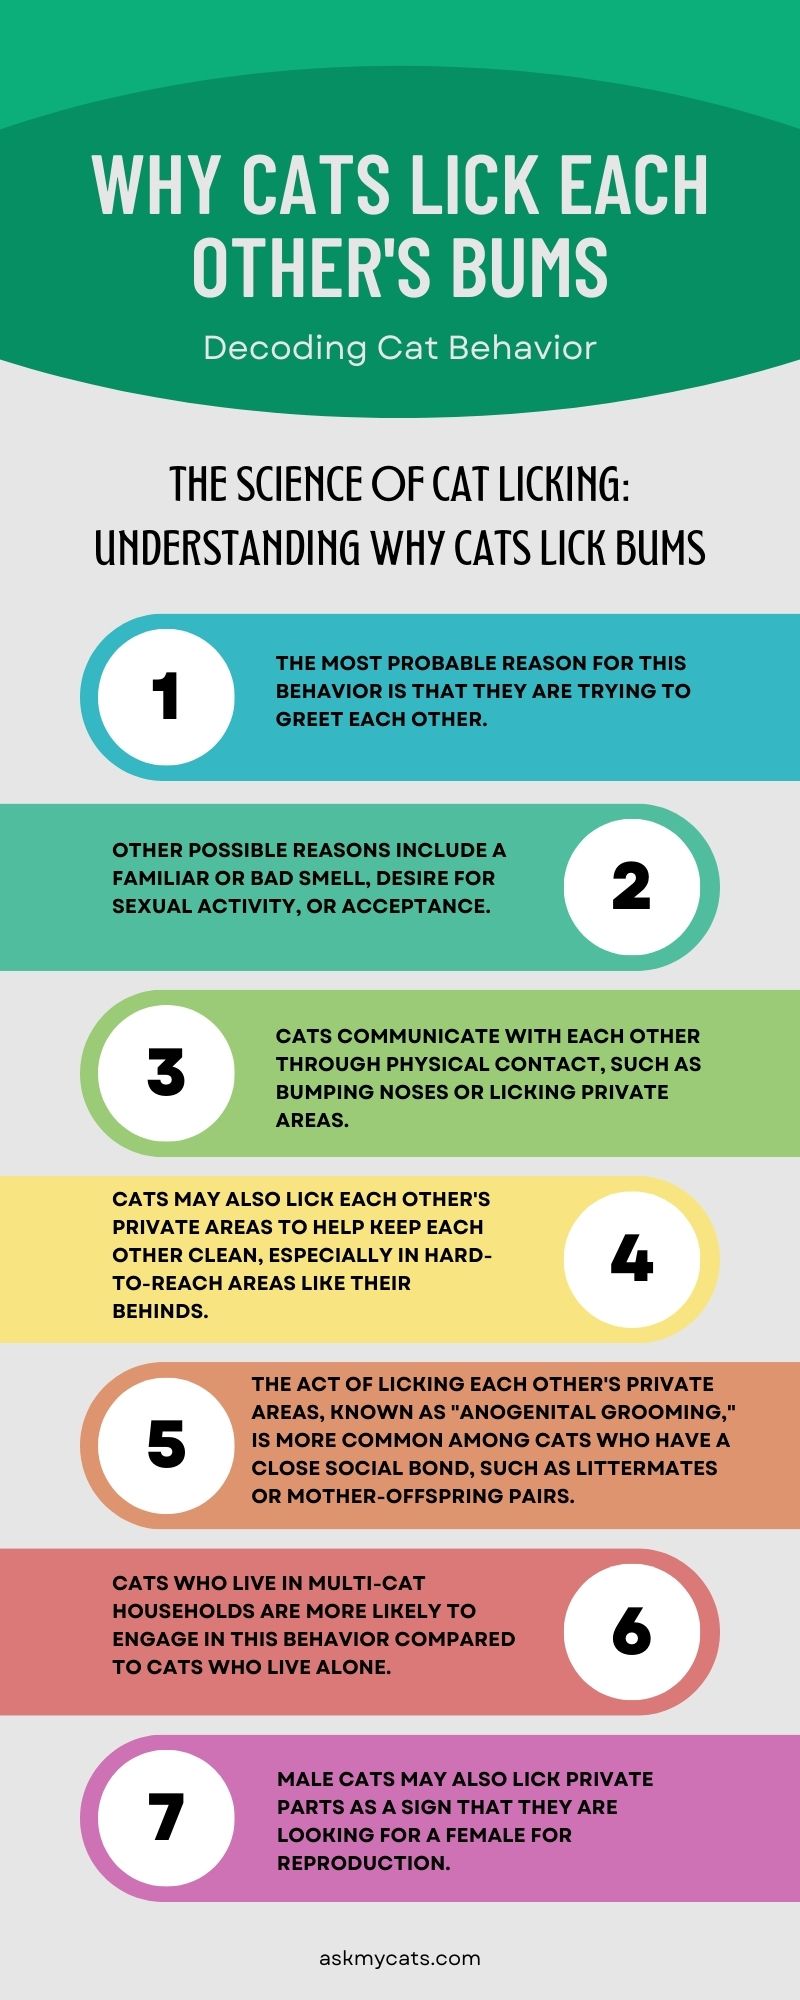 Why Cats Lick Each Other's Bums (Infographic)